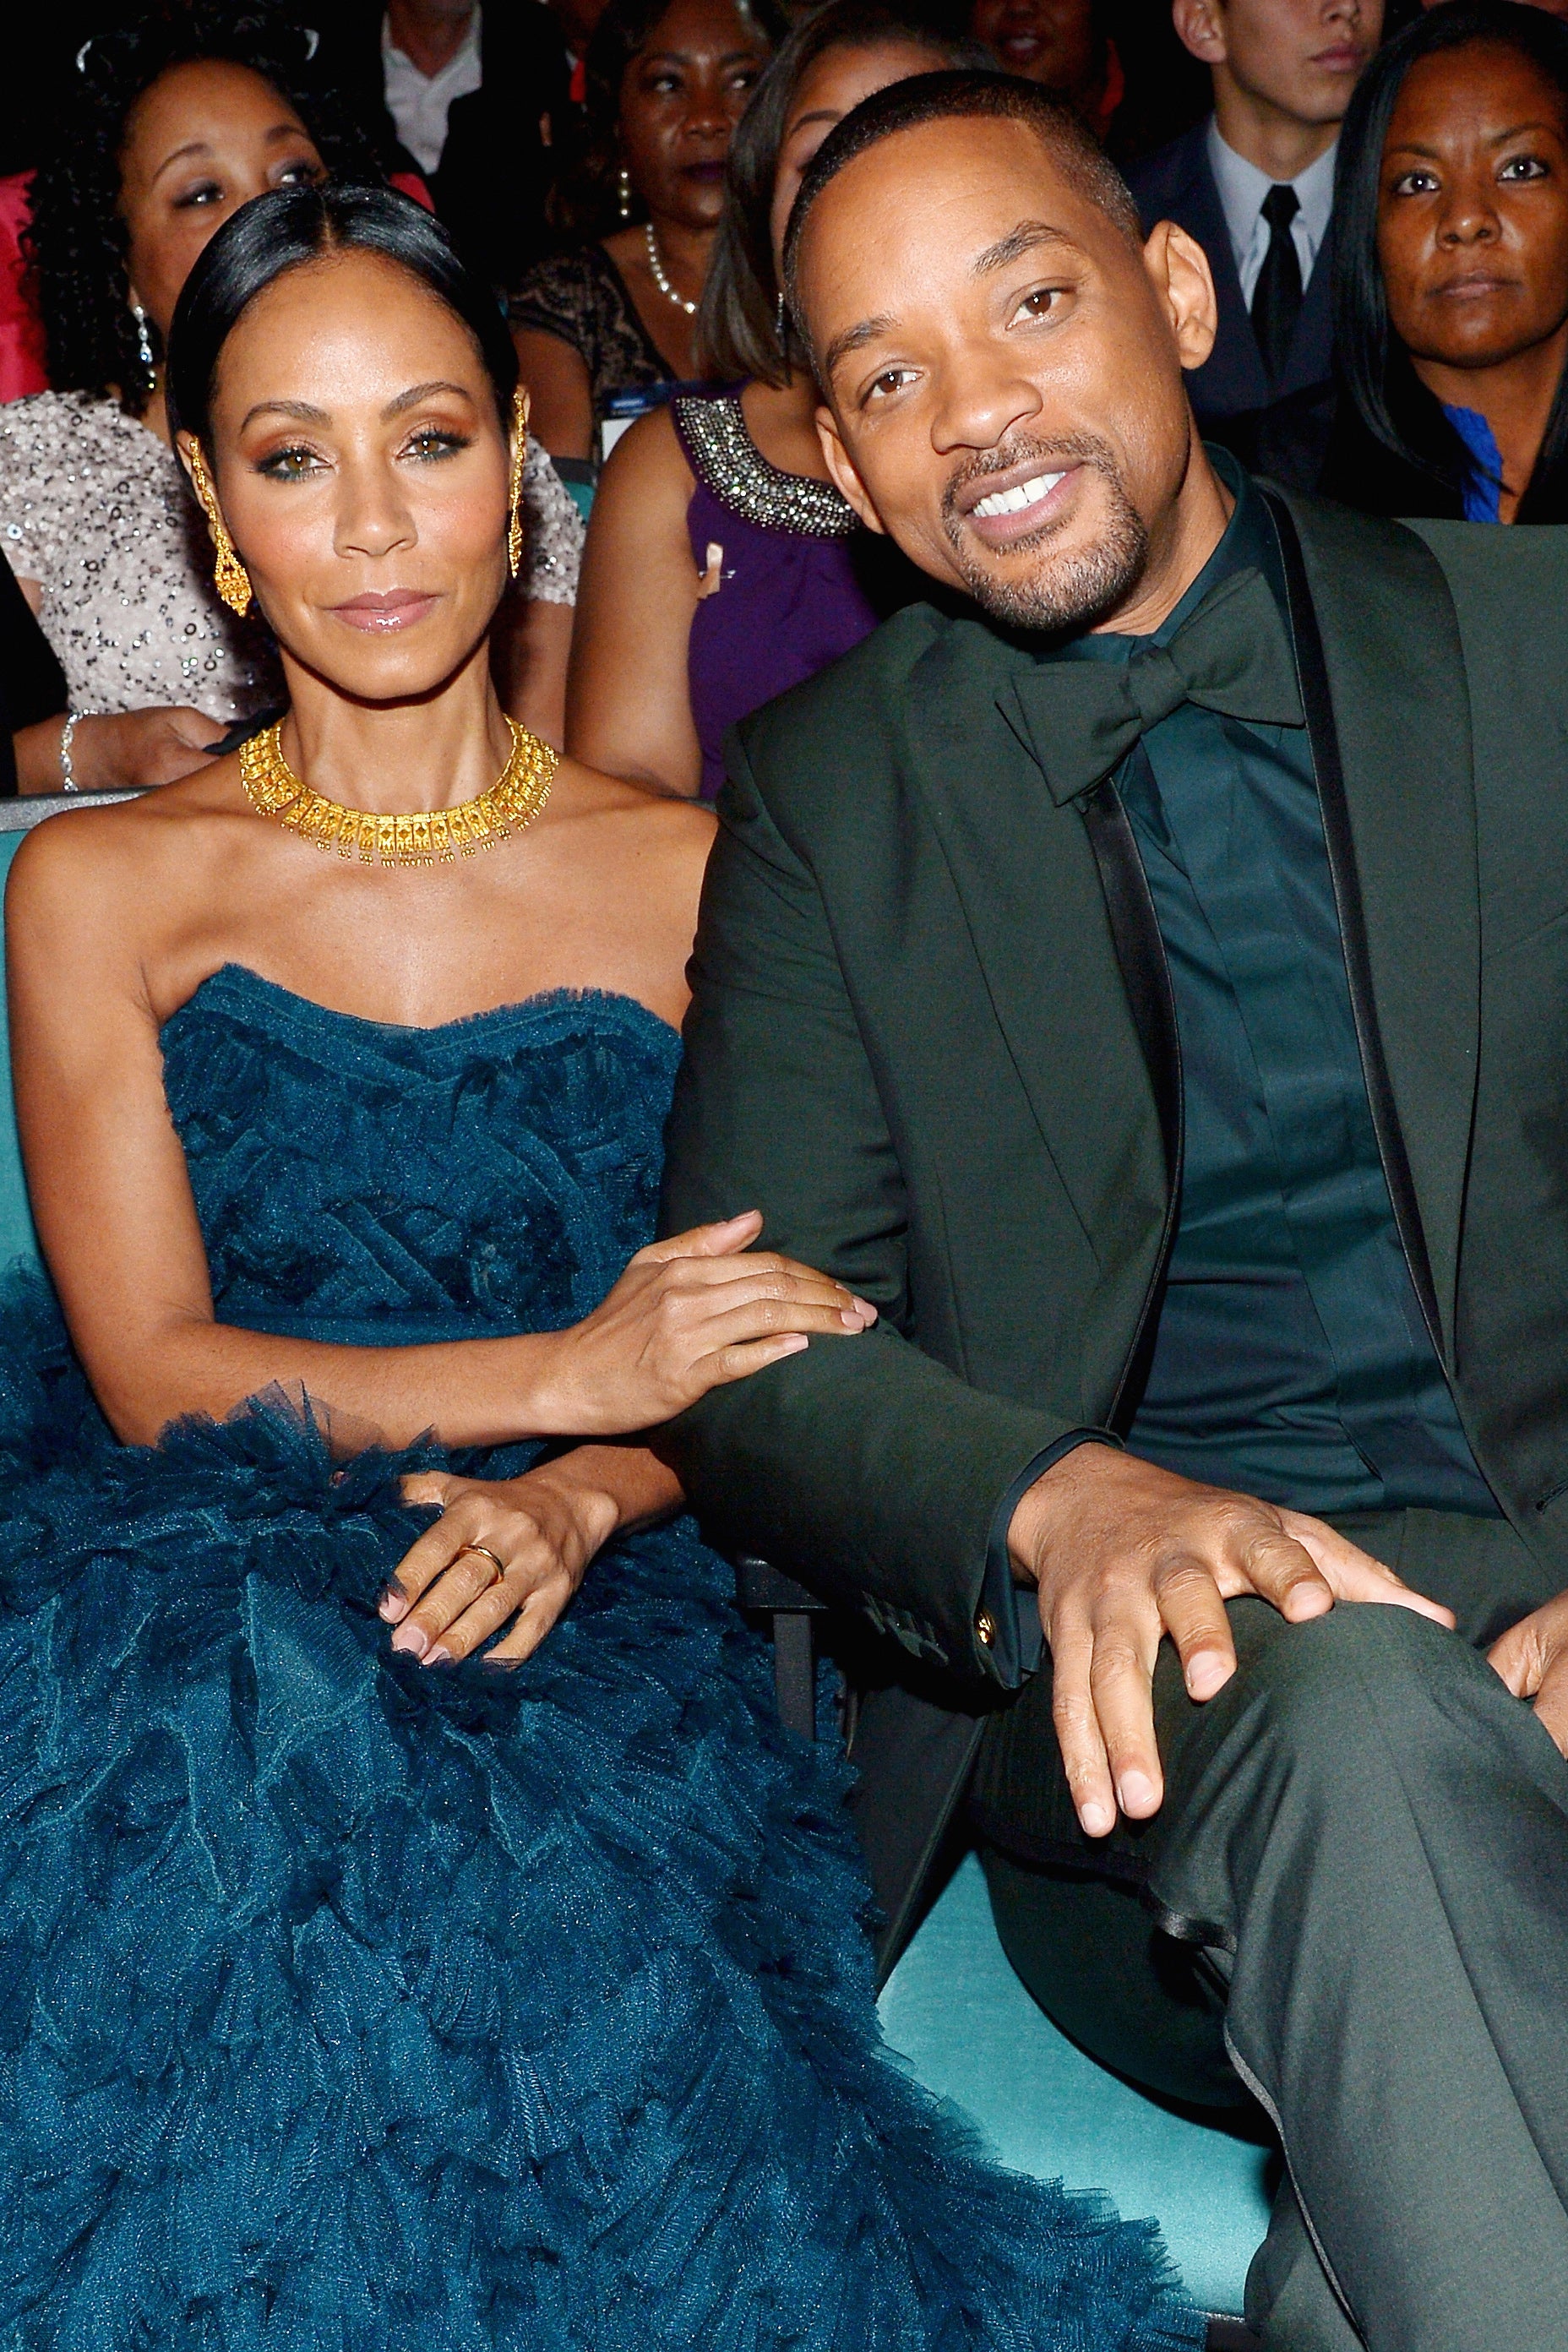 Jada Wishes Will Smith a Very Happy Birthday, Thanks Him for Helping Her Change the World
